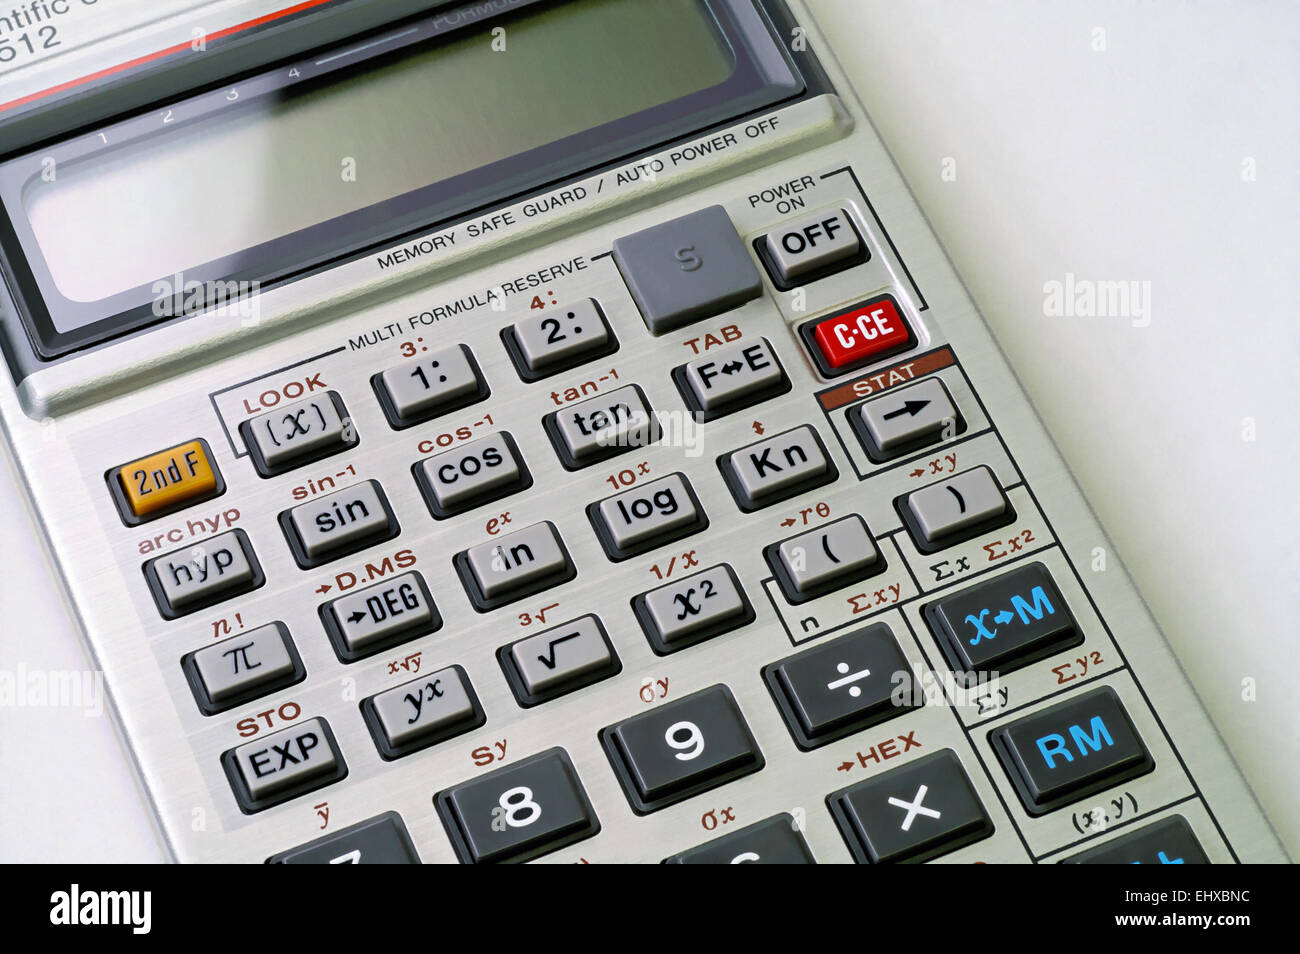 Scientific calculator with trigonometric, exponential, coordinates  conversion (Cartesian / polar) , and other keys visible Stock Photo - Alamy